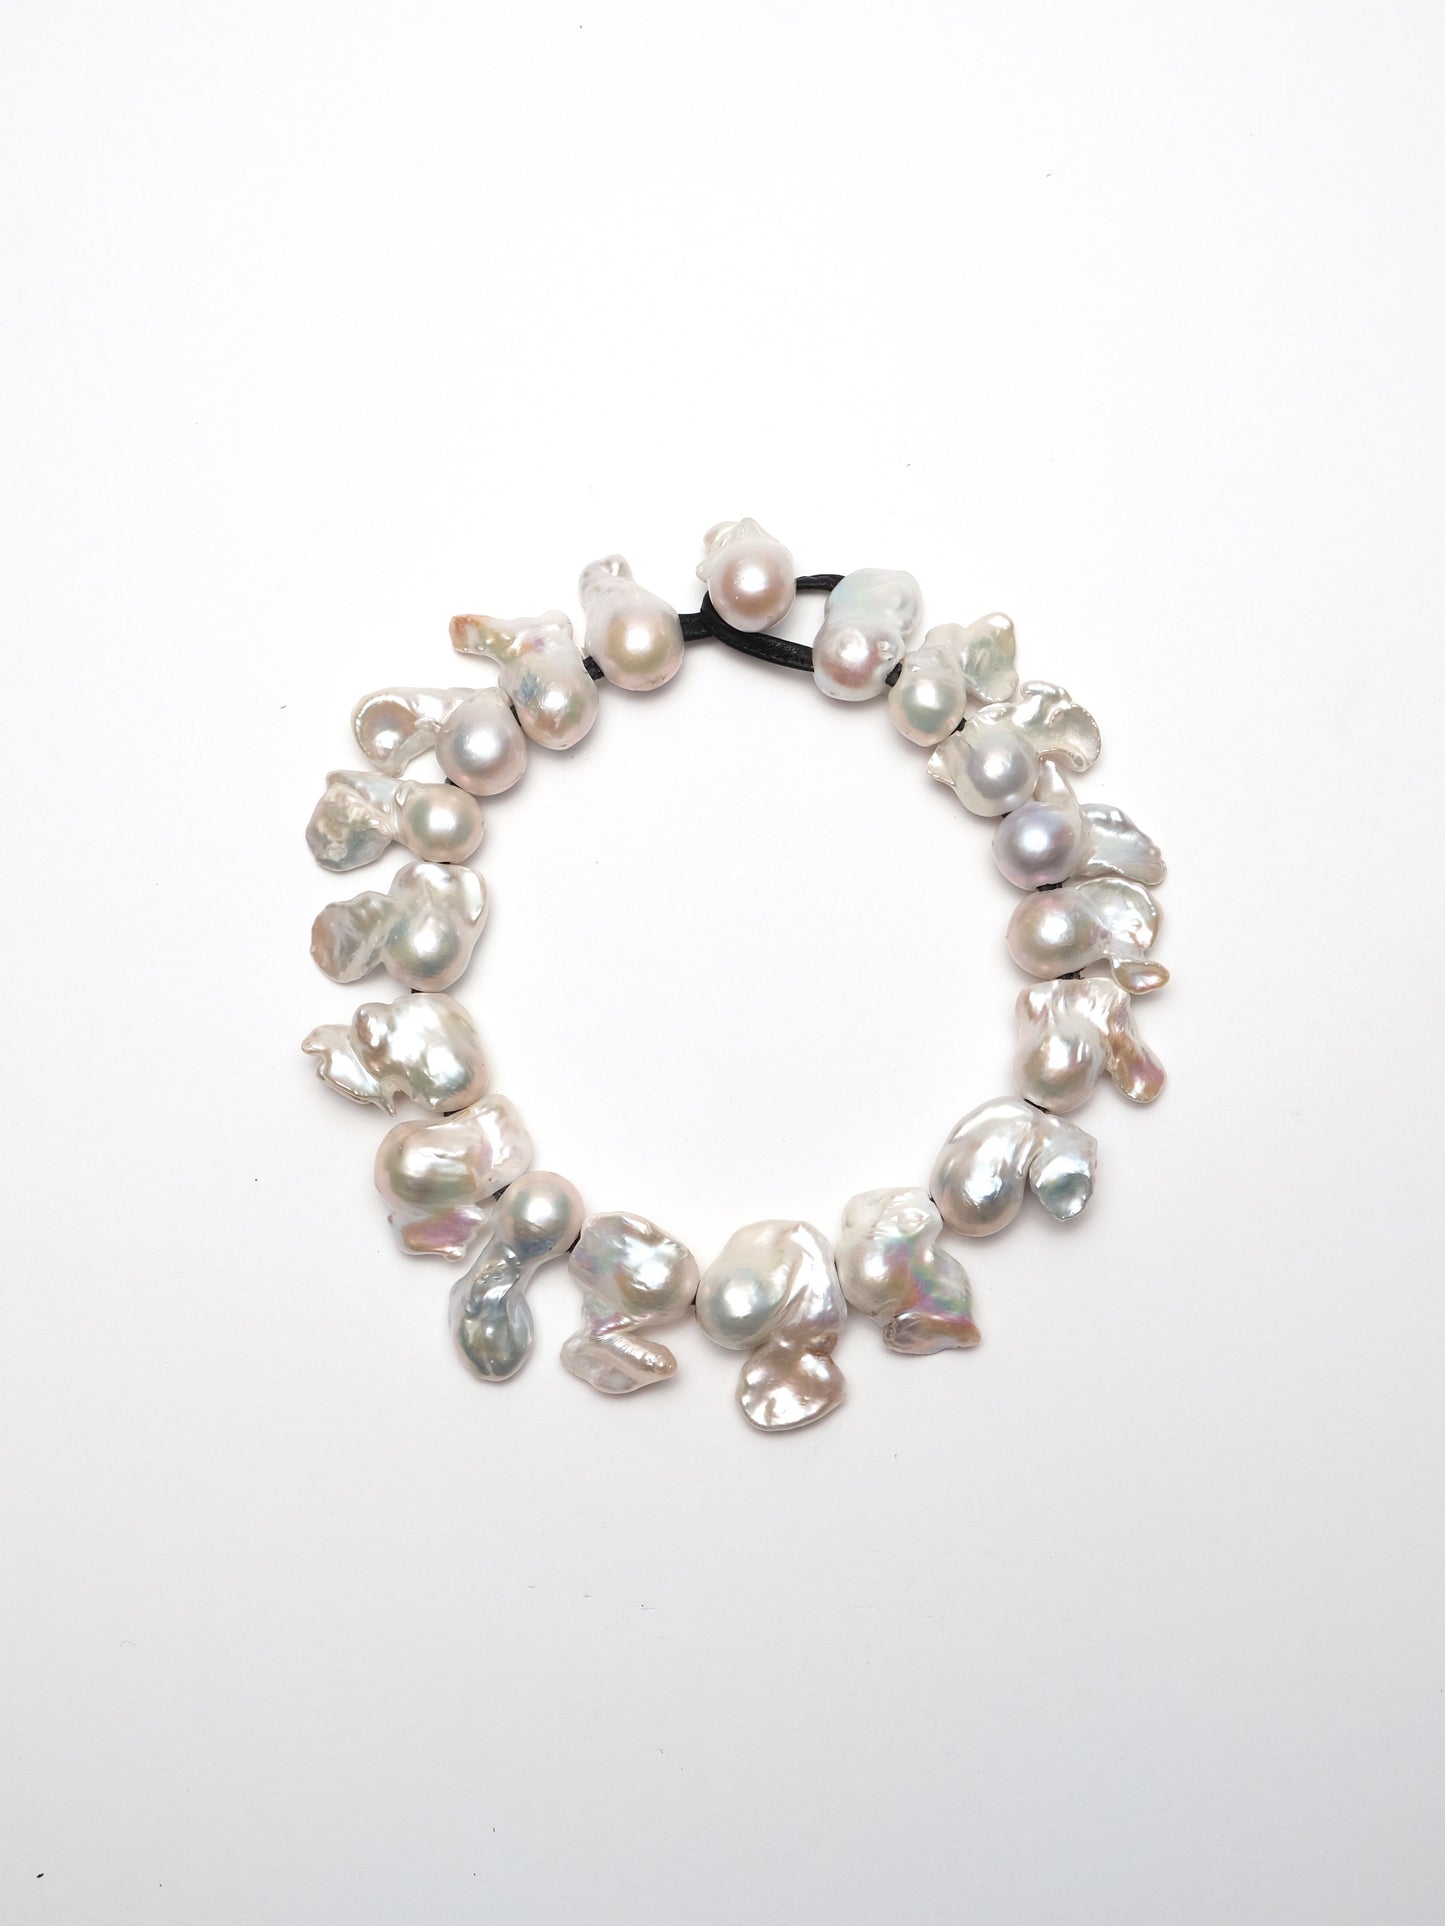 Necklace: baroque pearls, leather